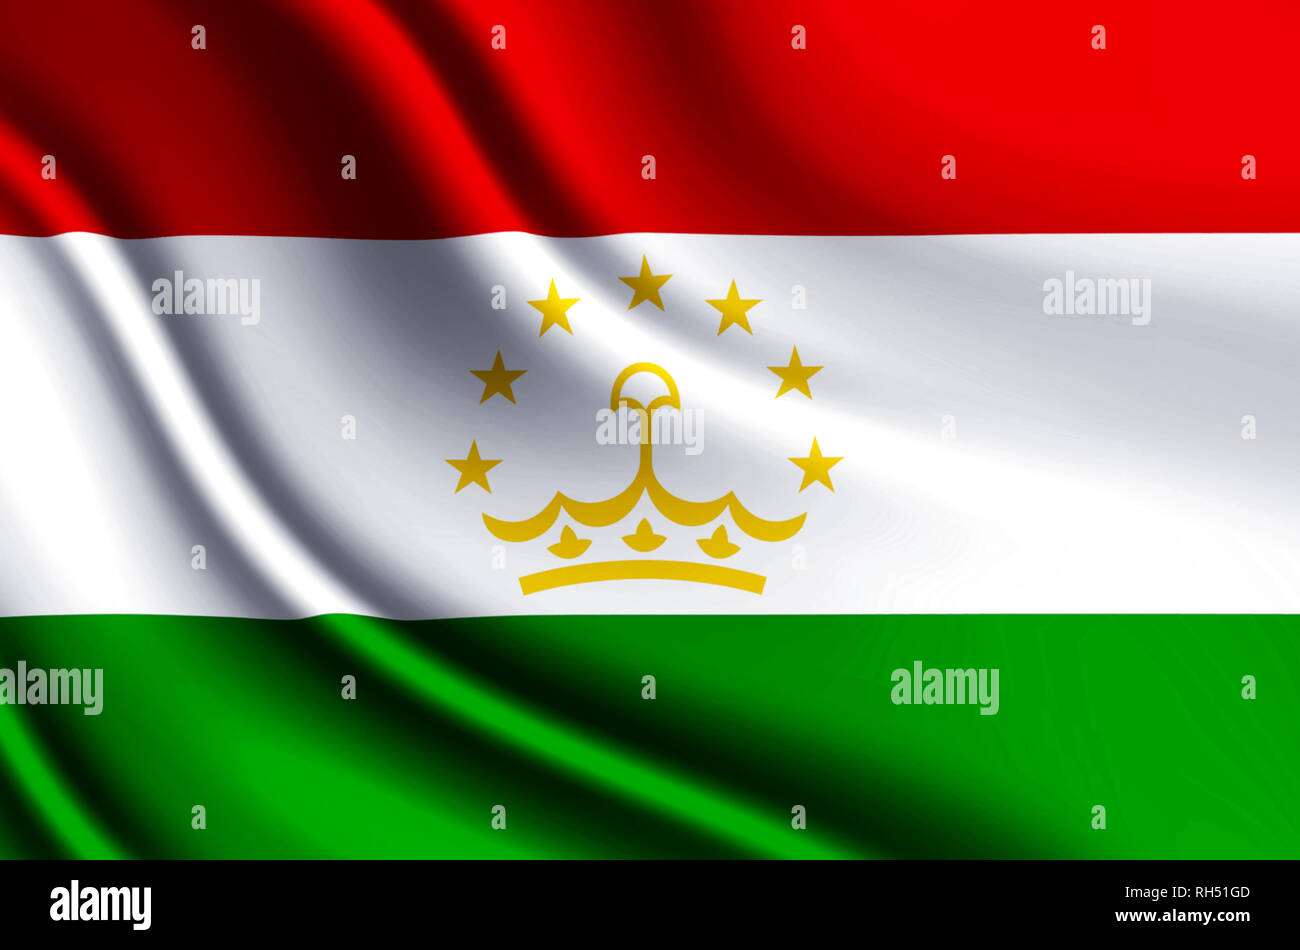 Tajikistan modern and realistic closeup 3D flag illustration. Perfect for background or texture purposes. Stock Photo